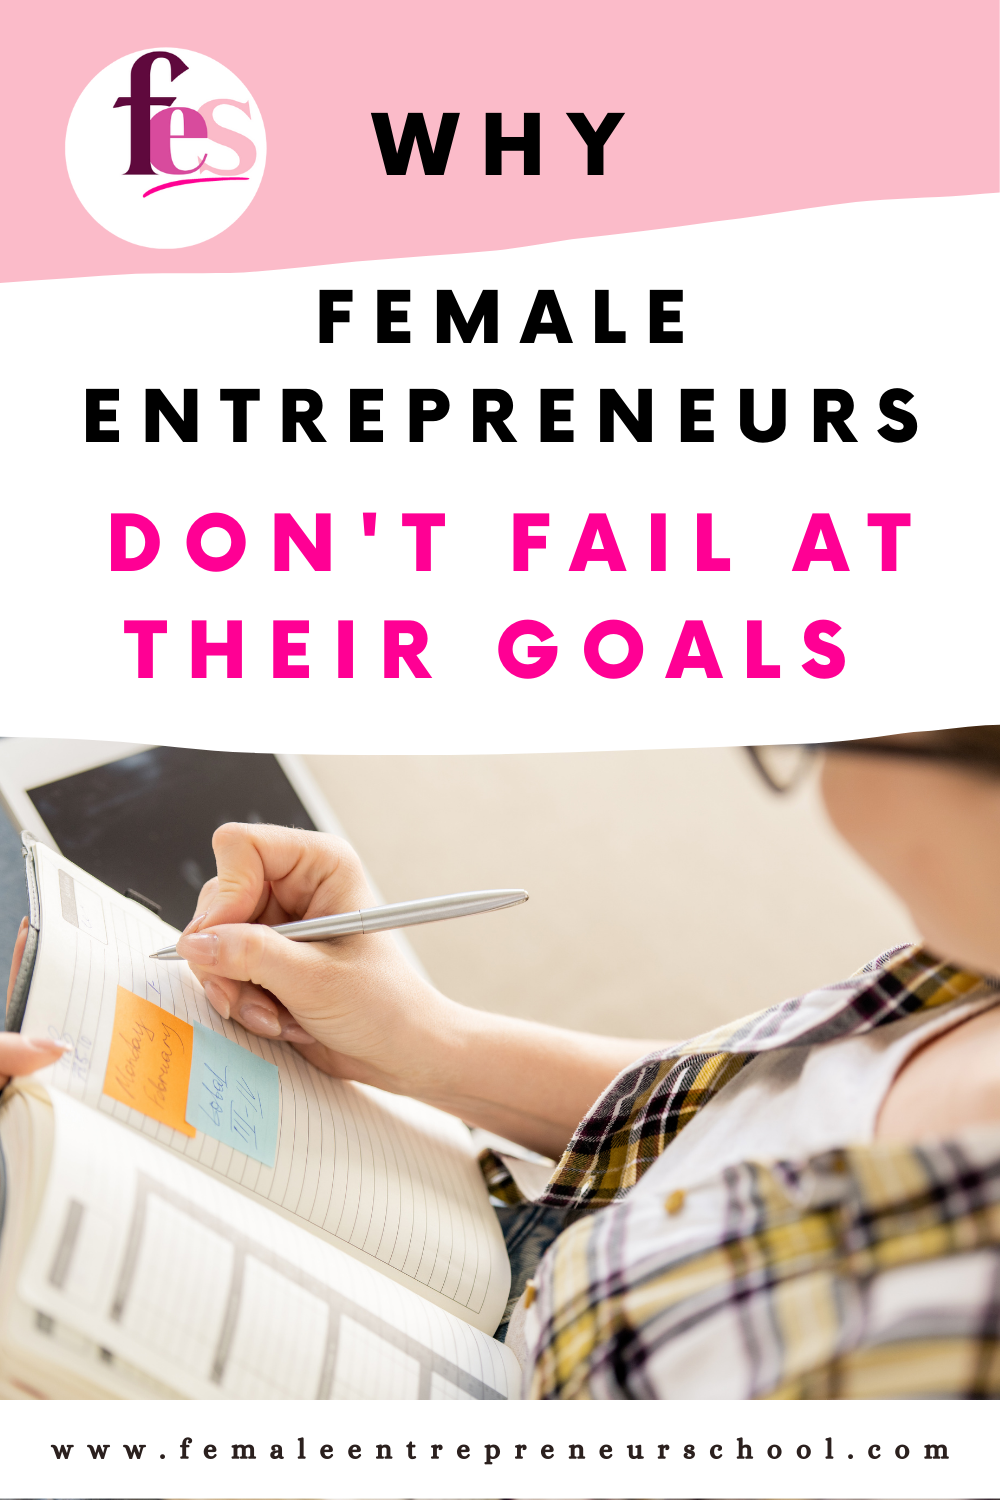 Text: why female entrepreneurs don't fail at their goals, with image of lady writing in a journal.